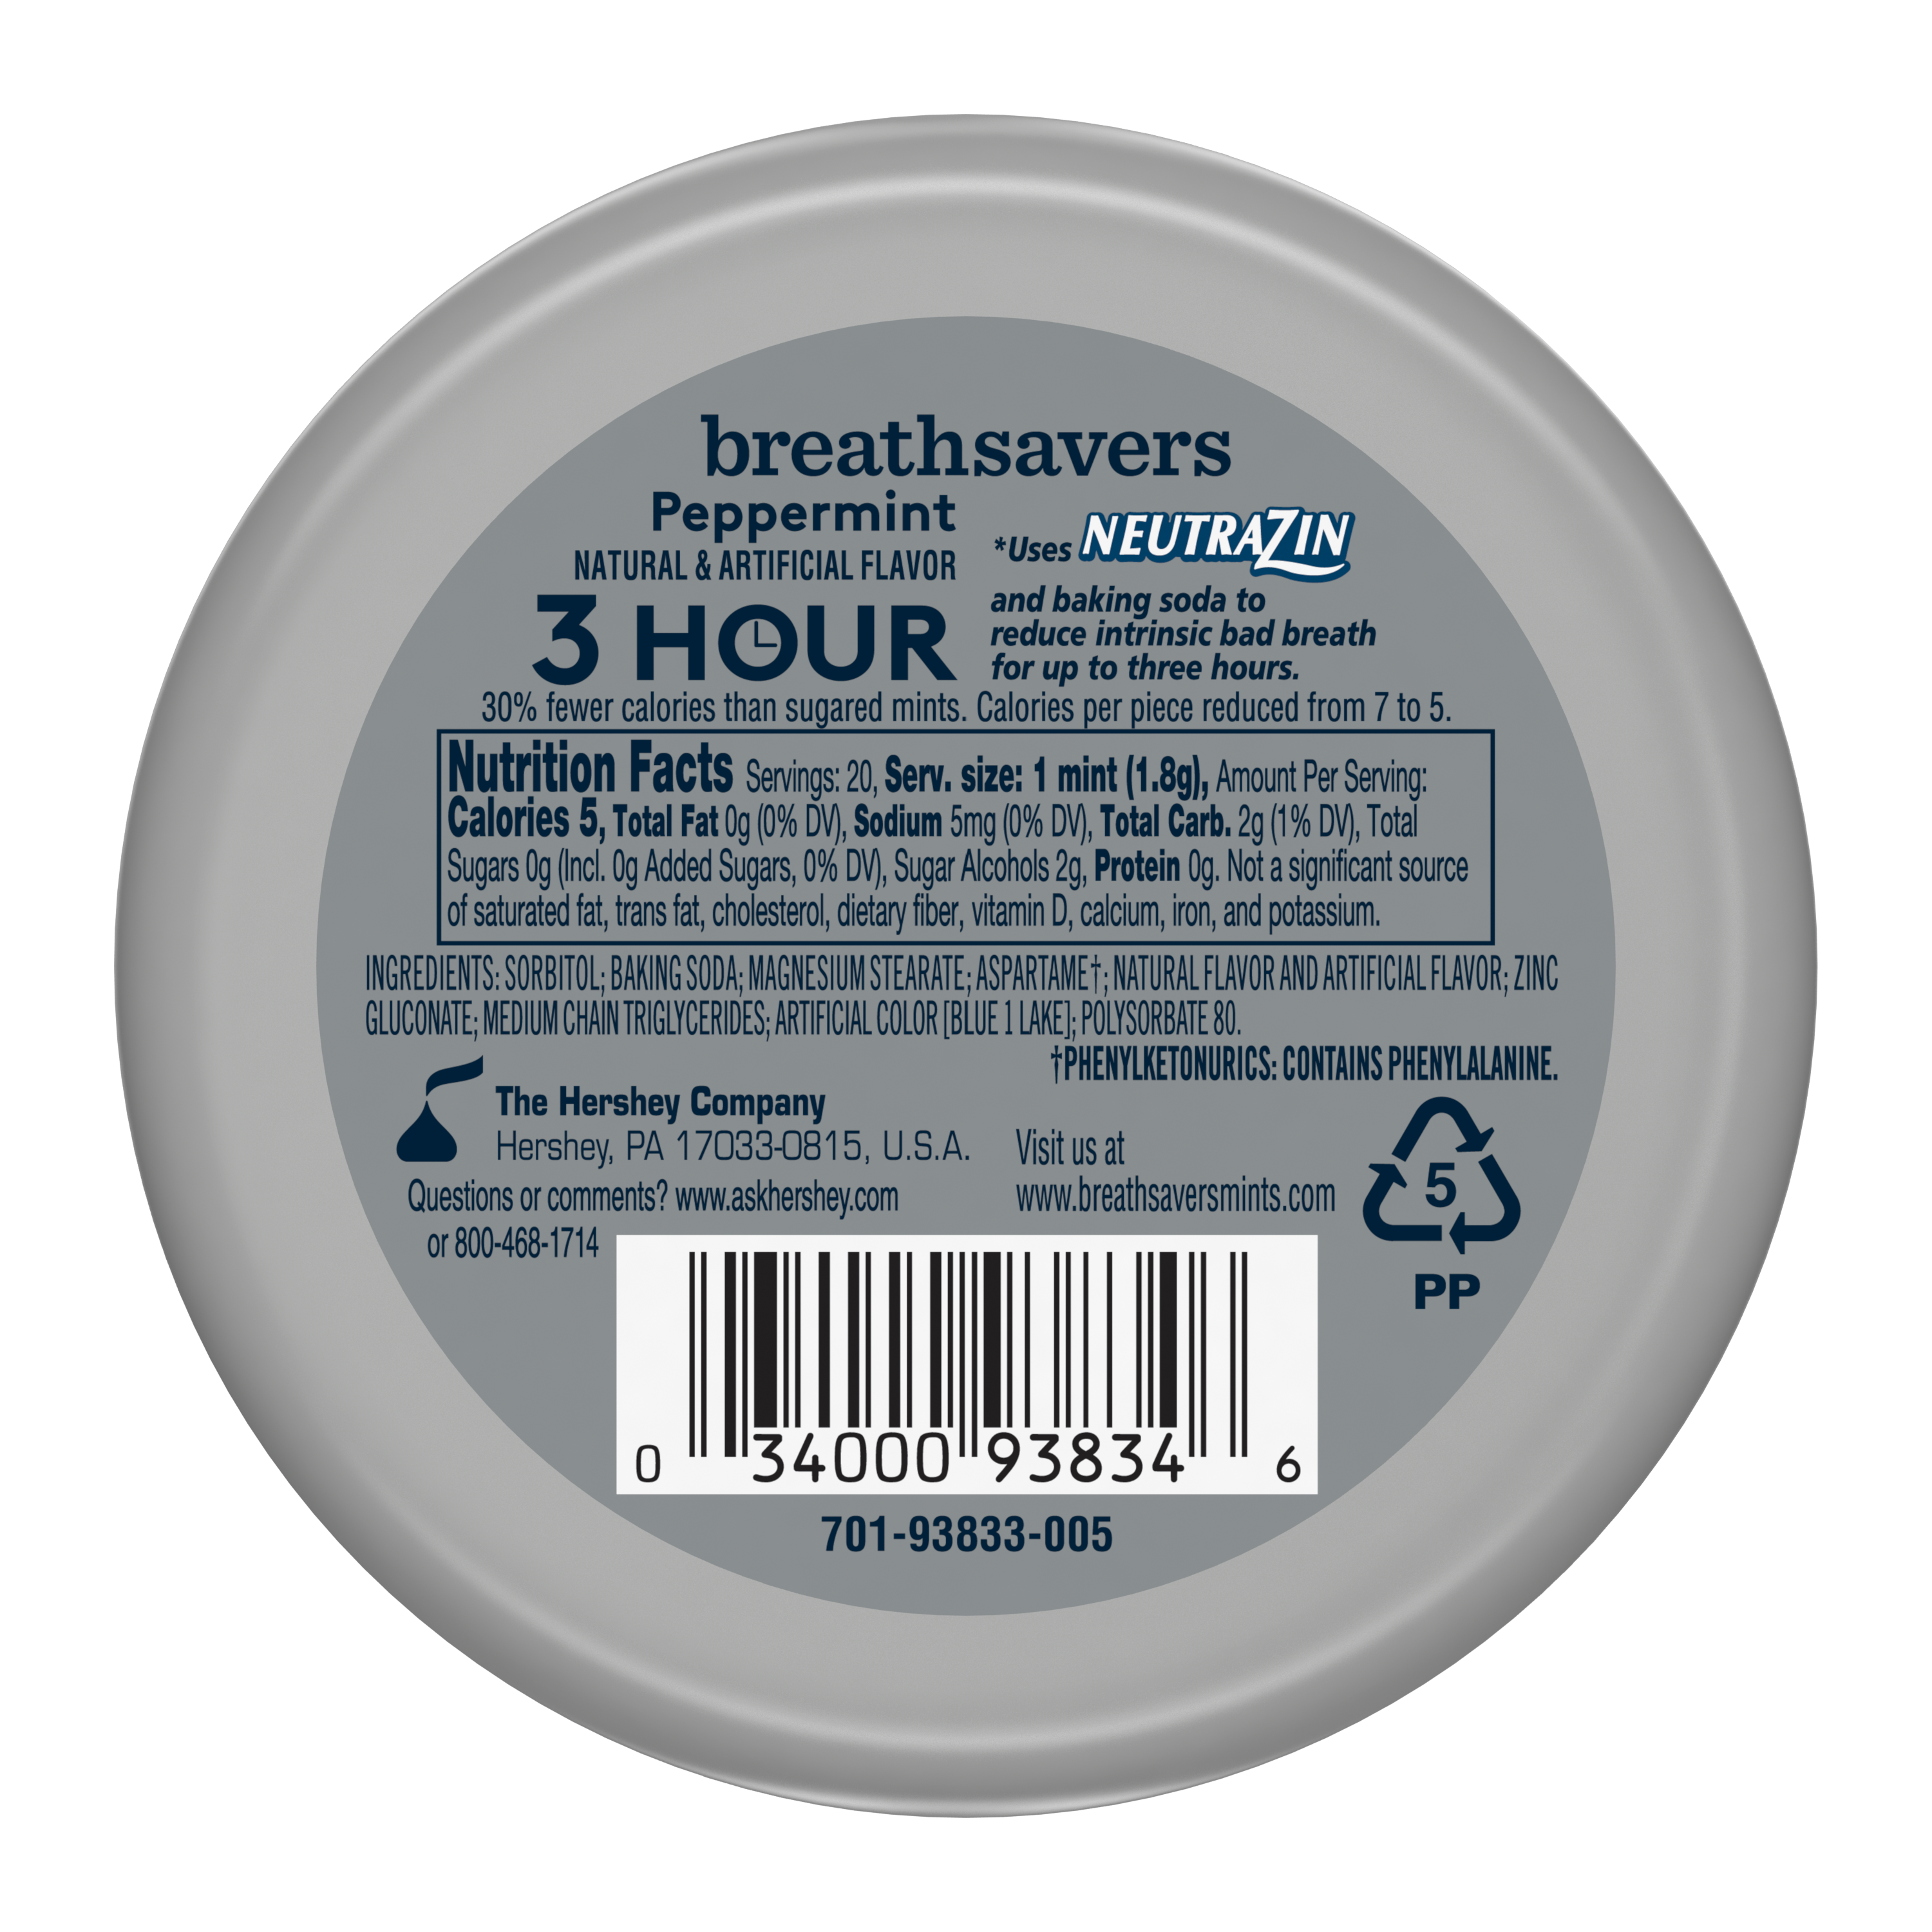 BREATH SAVERS 3-Hour Peppermint Sugar Free Mints, 1.27 oz puck - Back of Package